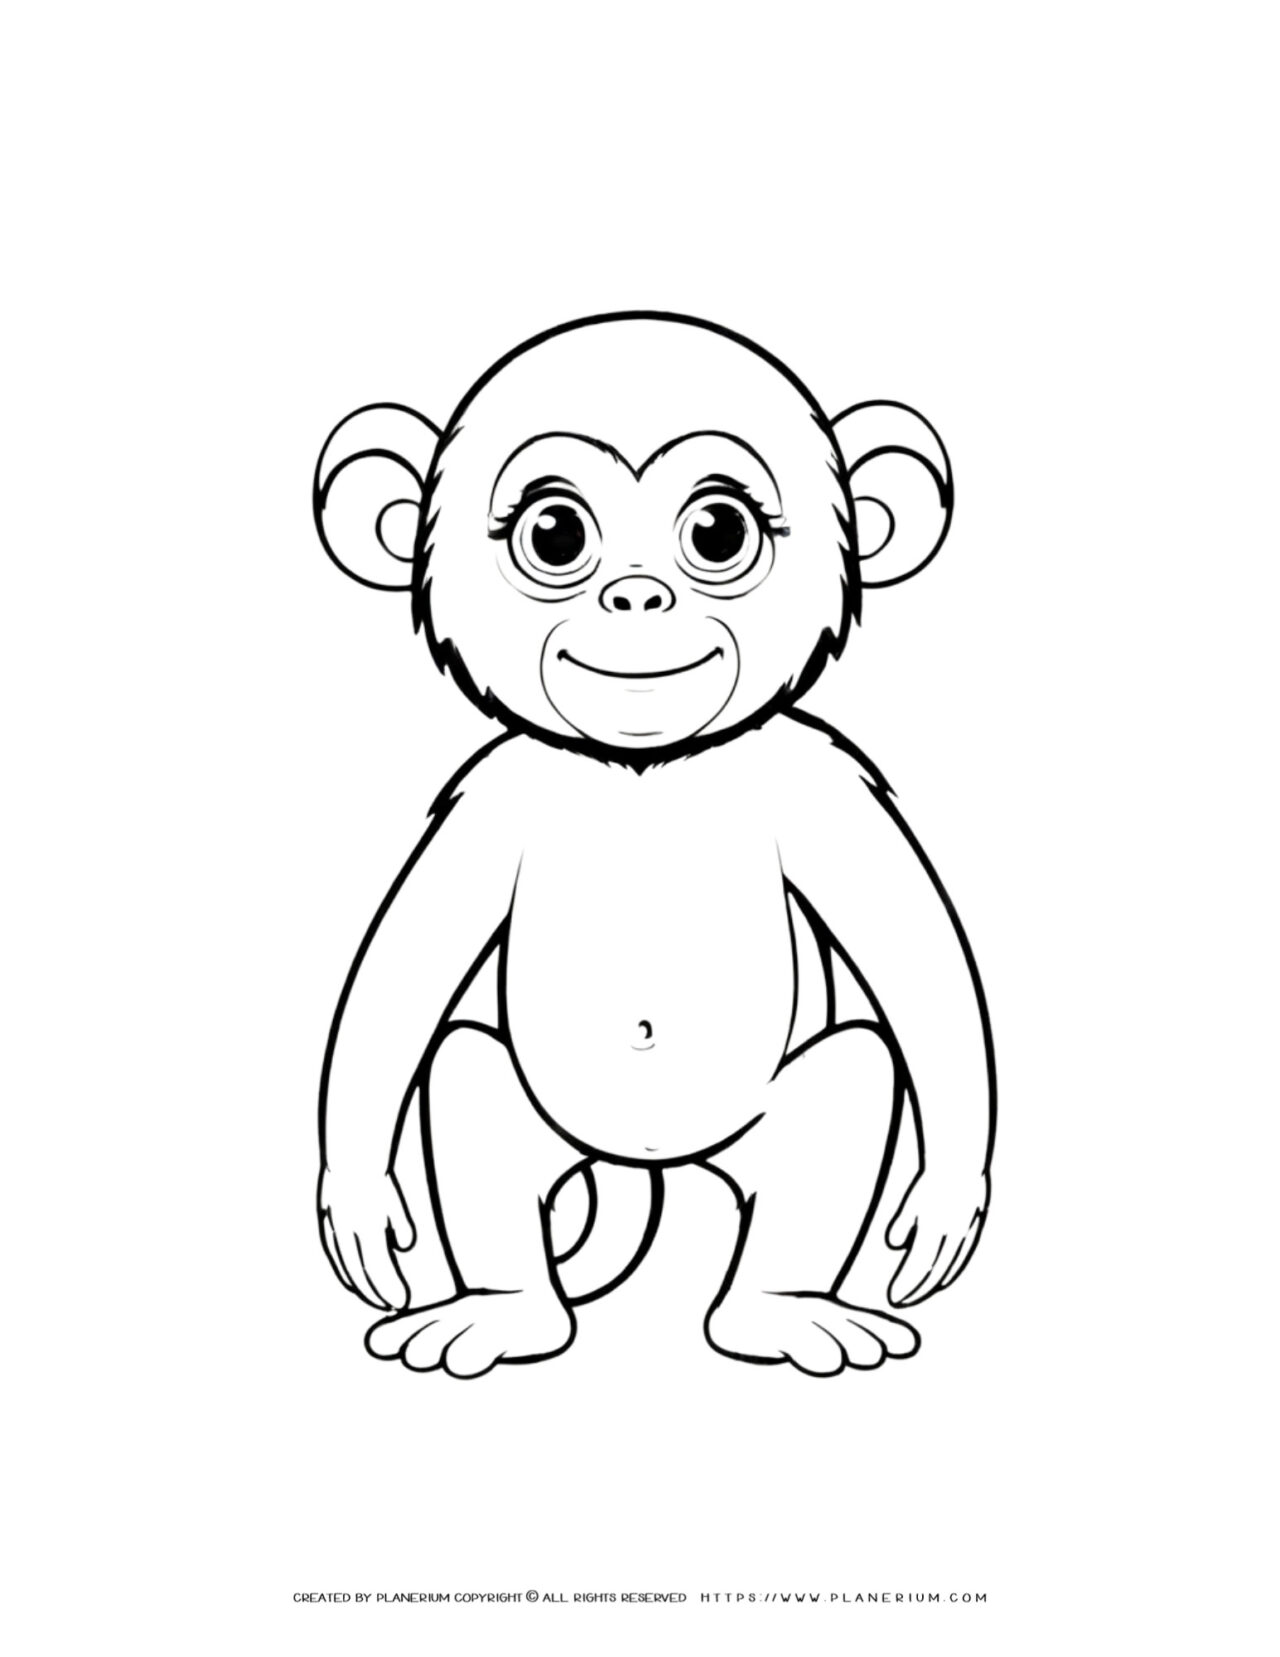 Baby-Monkey-Outline-Coloring-Page-for-Kids